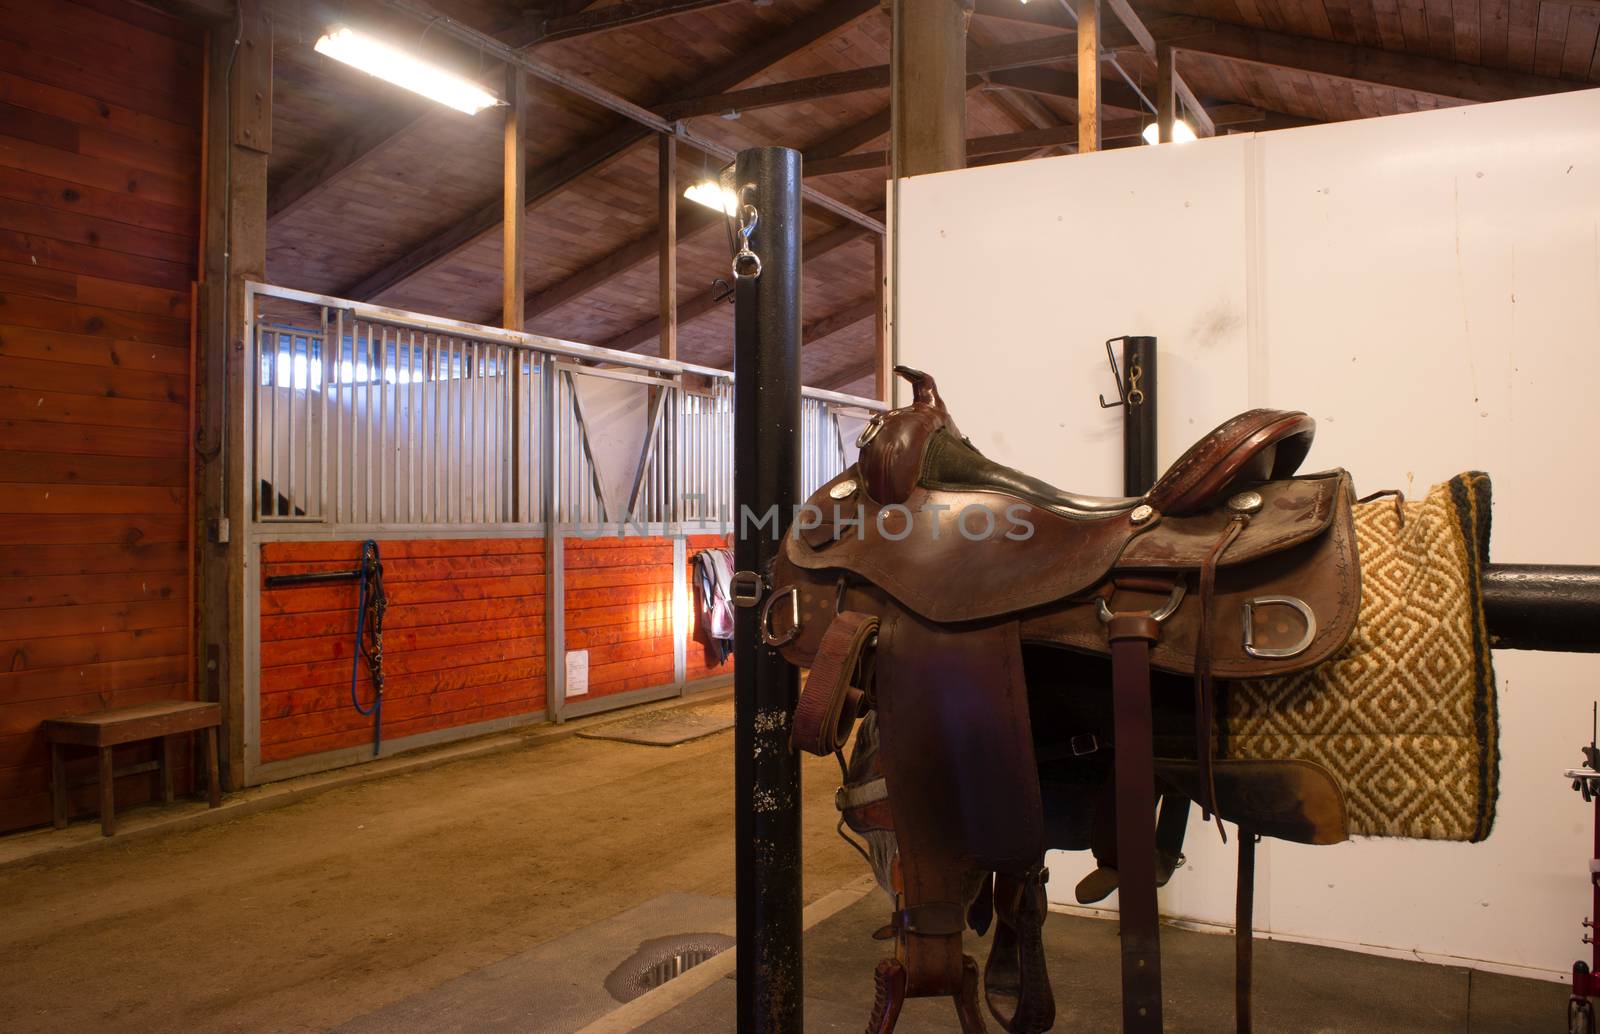 A saddle waits to be mounted on horses back at stables